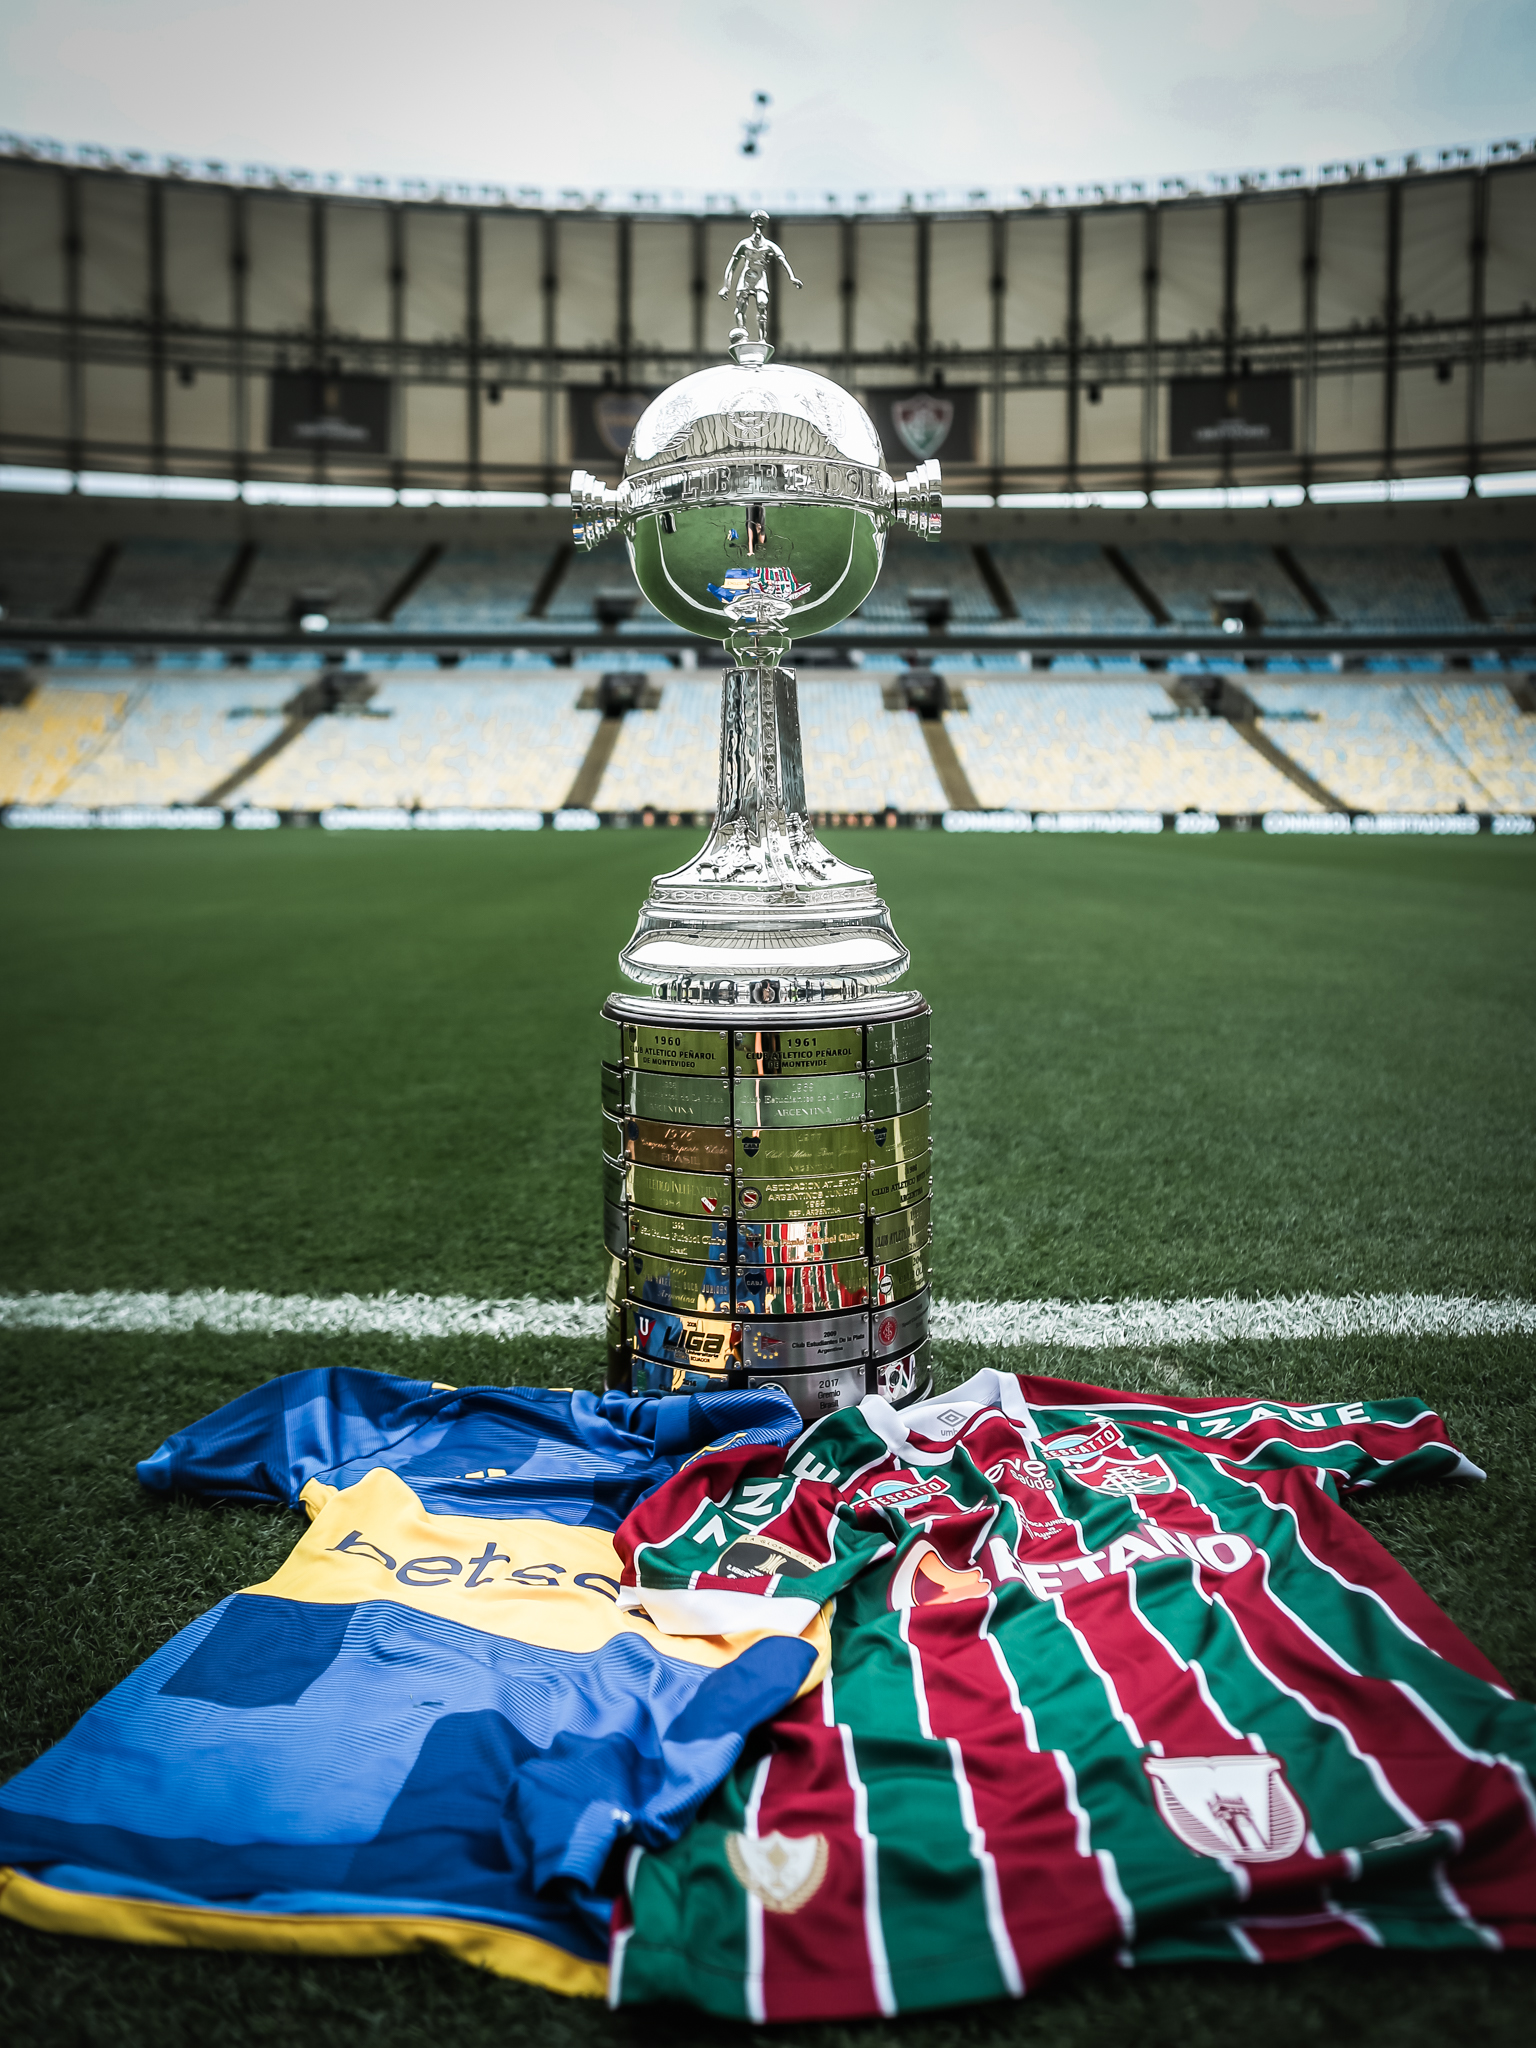 CONMEBOL Libertadores on X: 😍 The CONMEBOL #Libertadores is back! ⭐ The  road to #GloriaEterna begins again! 🤔 Who will lift the Copa this year?   / X